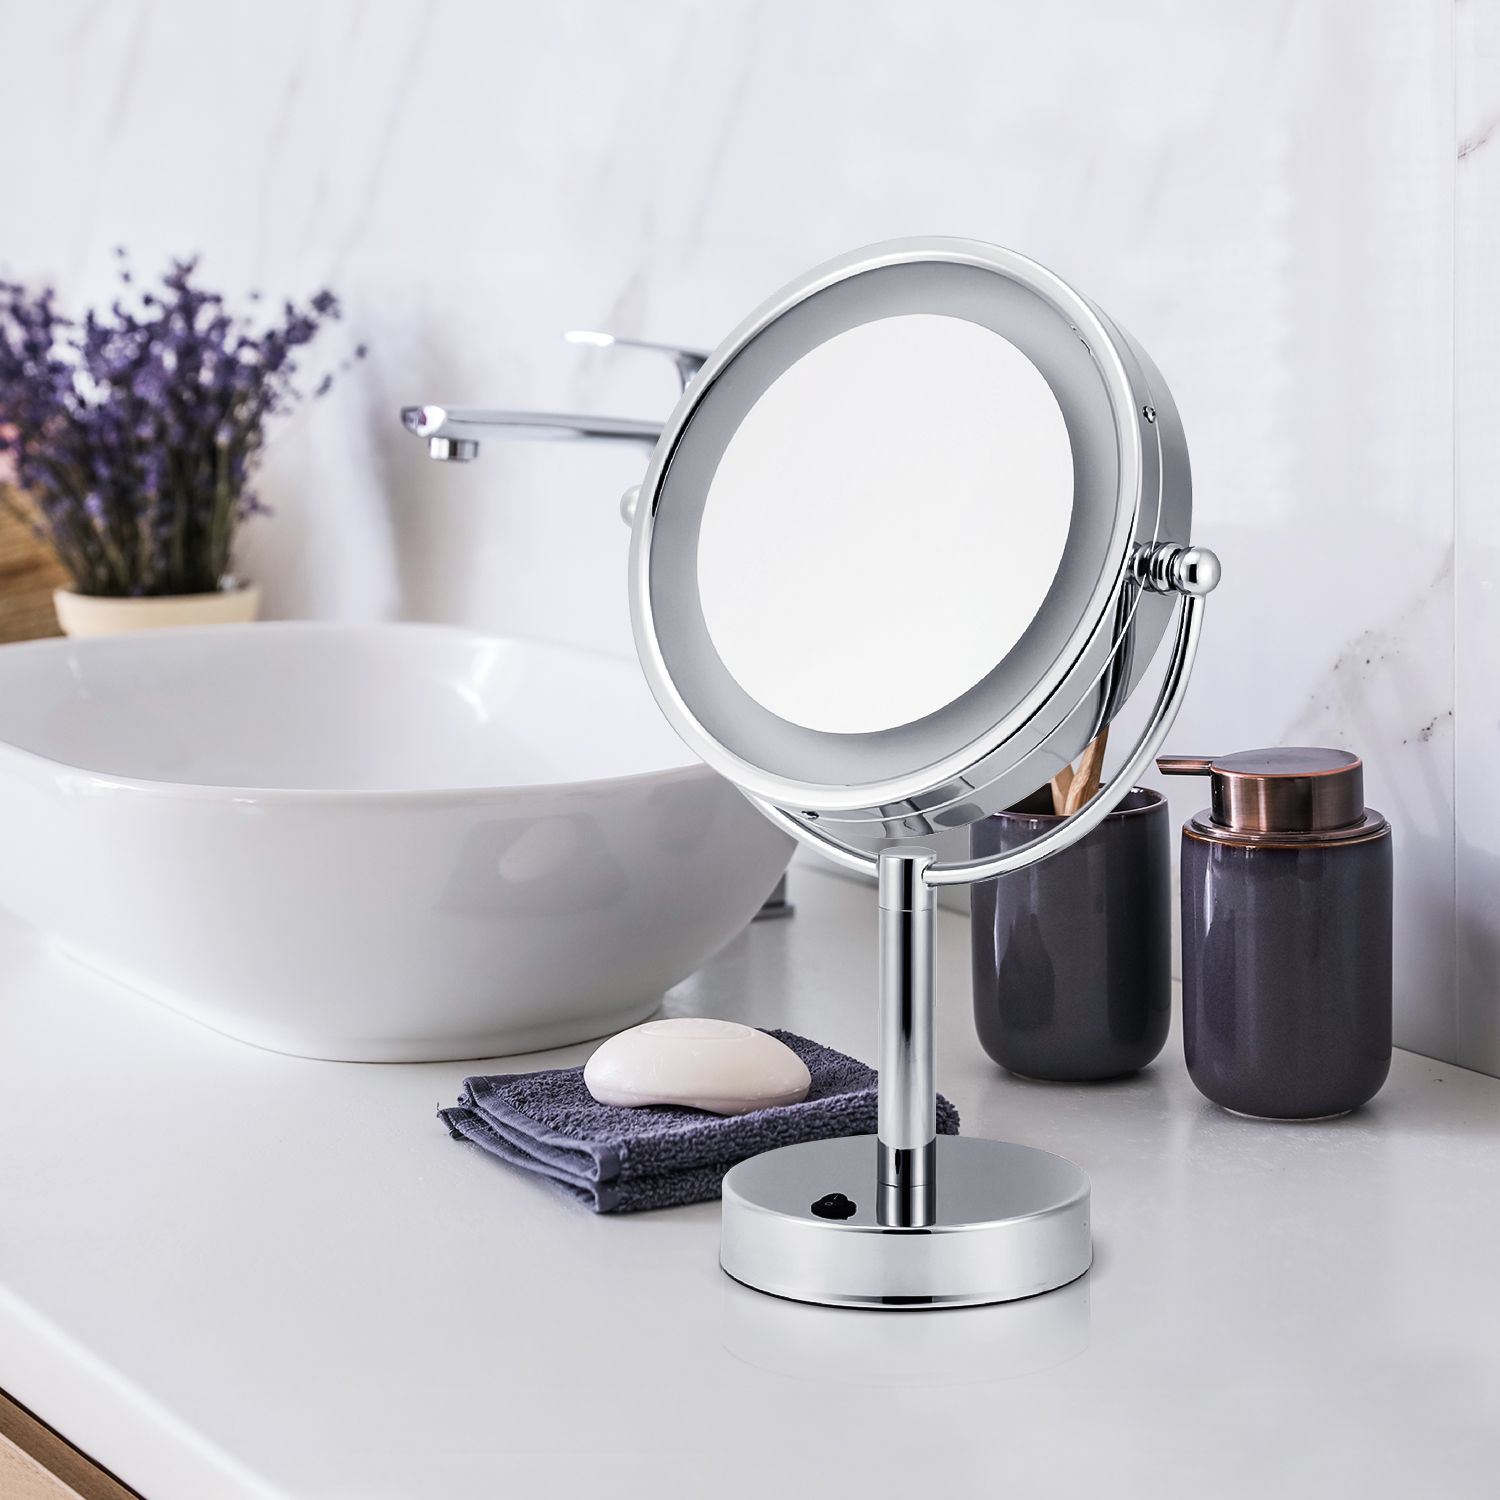 ICO Bath V9013 8.5" Double Sided Lighted Freestanding Mirror - Chrome